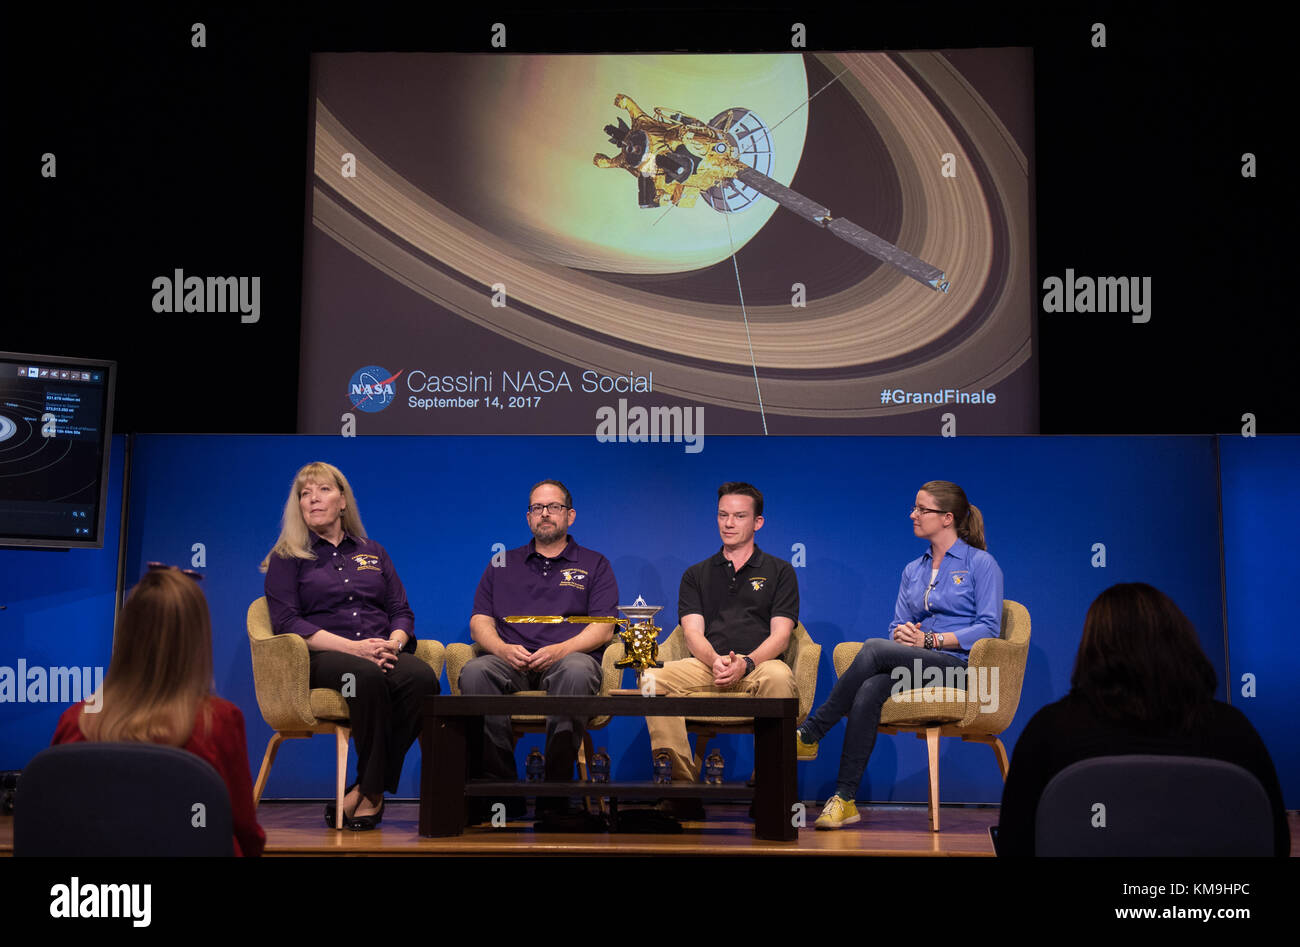 Cassini Project Scientist Linda Spilker (left), Cornell University Cassini Interdisciplinary Titan Scientist Jonathan Lunine, Cassini Composite Infrared Spectrometer (CIRS) Instrument Deputy Principle Investigator Connor Nixon, and Cassini Assistant Project Science Systems Engineer Morgan Cable participate in a panel discussion on the end of the Cassini-Huygens Saturn mission at the NASA Jet Propulsion Laboratory September 14, 2017 in Pasadena, California.  (photo by Joel Kowsky  via Planetpix) Stock Photo